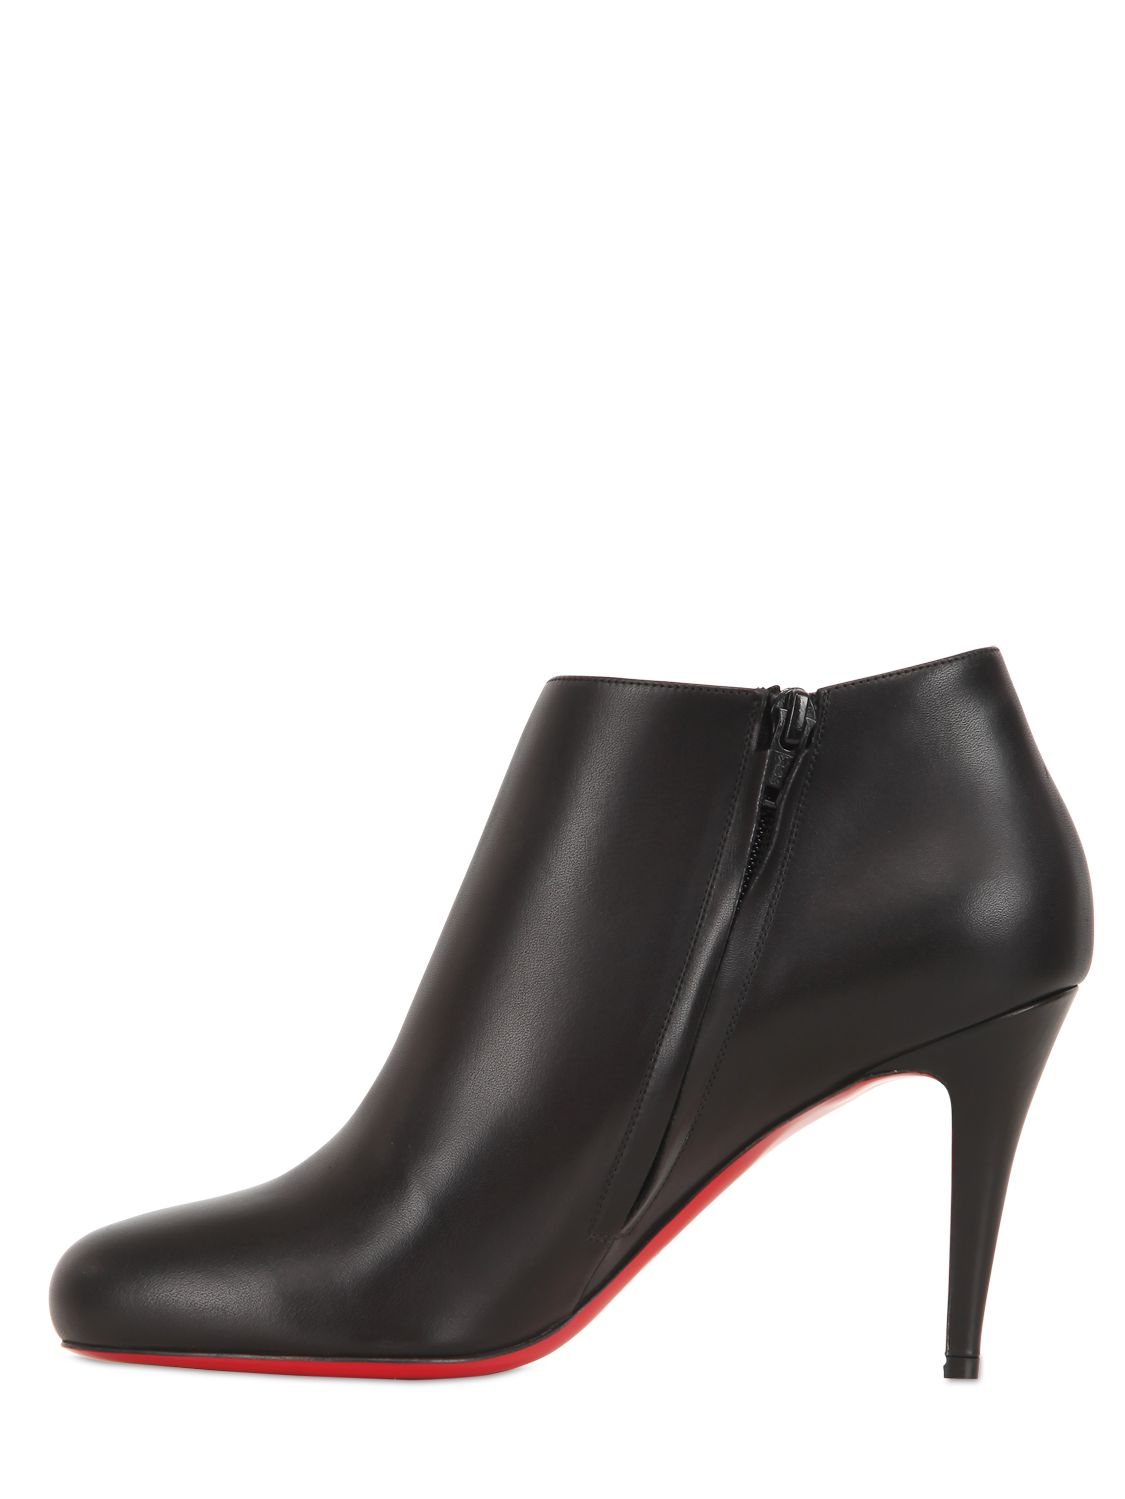 Christian louboutin 85Mm Belle Calf Leather Ankle Boots in Black ...  